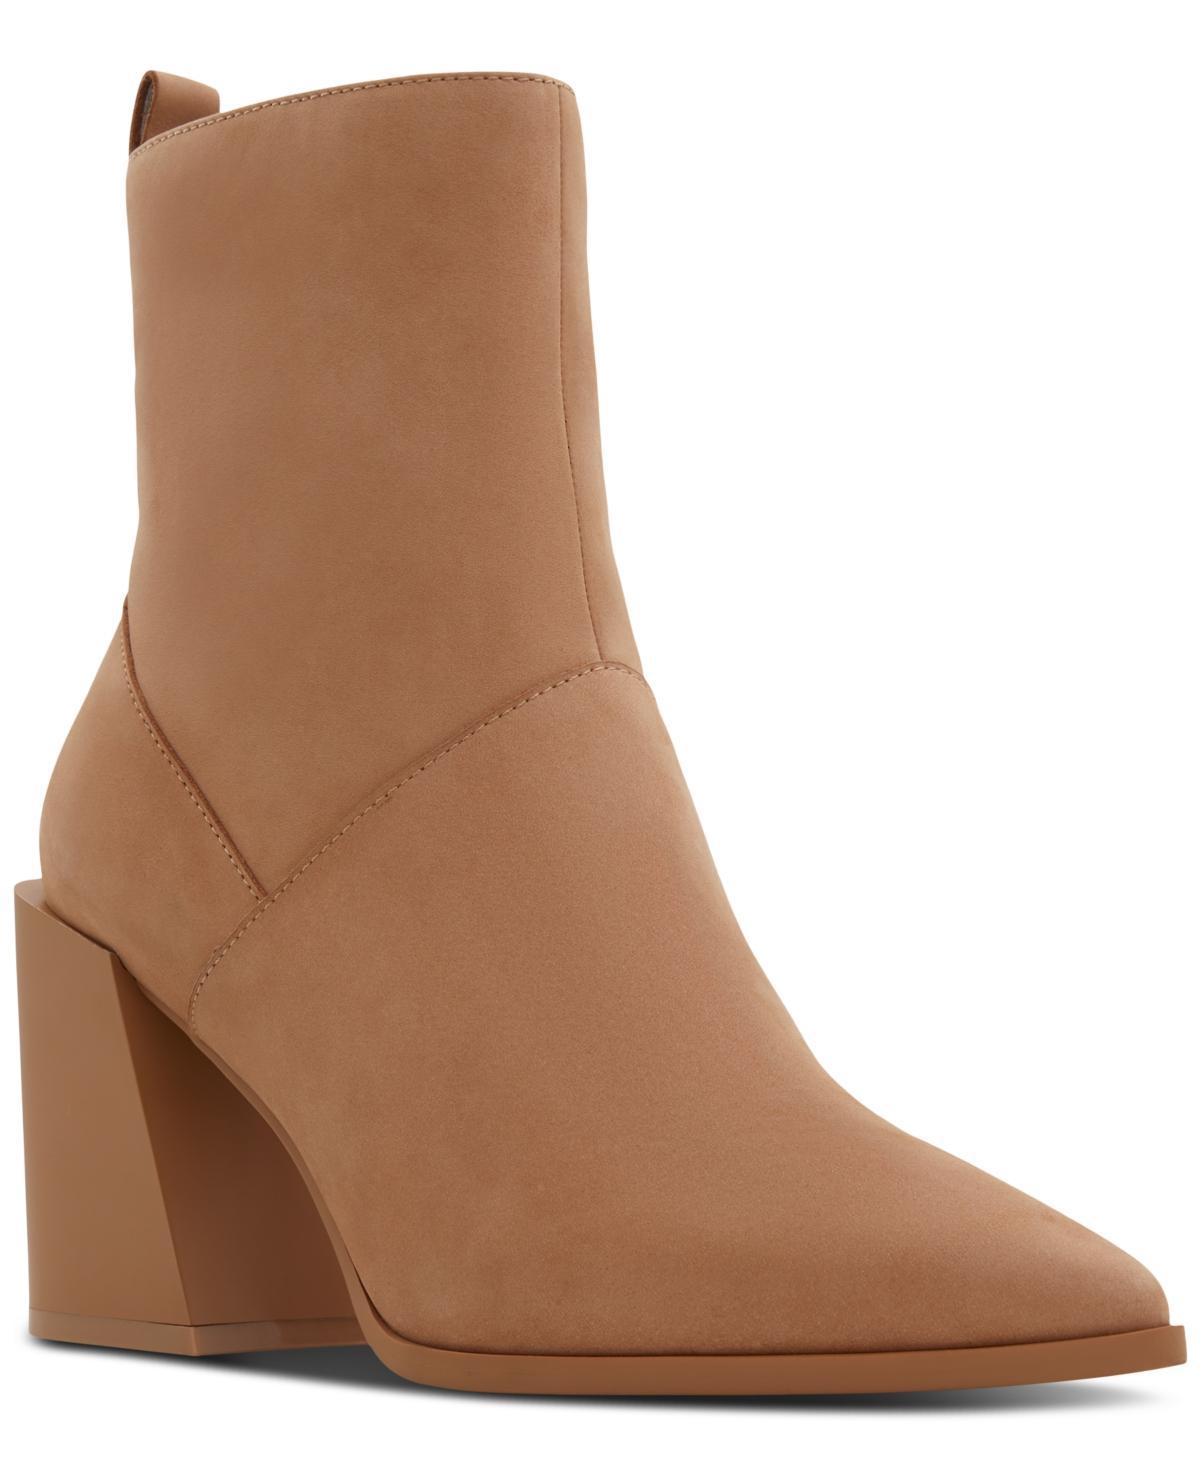 ALDO Bethanny Pointed Toe Block Heel Bootie Product Image